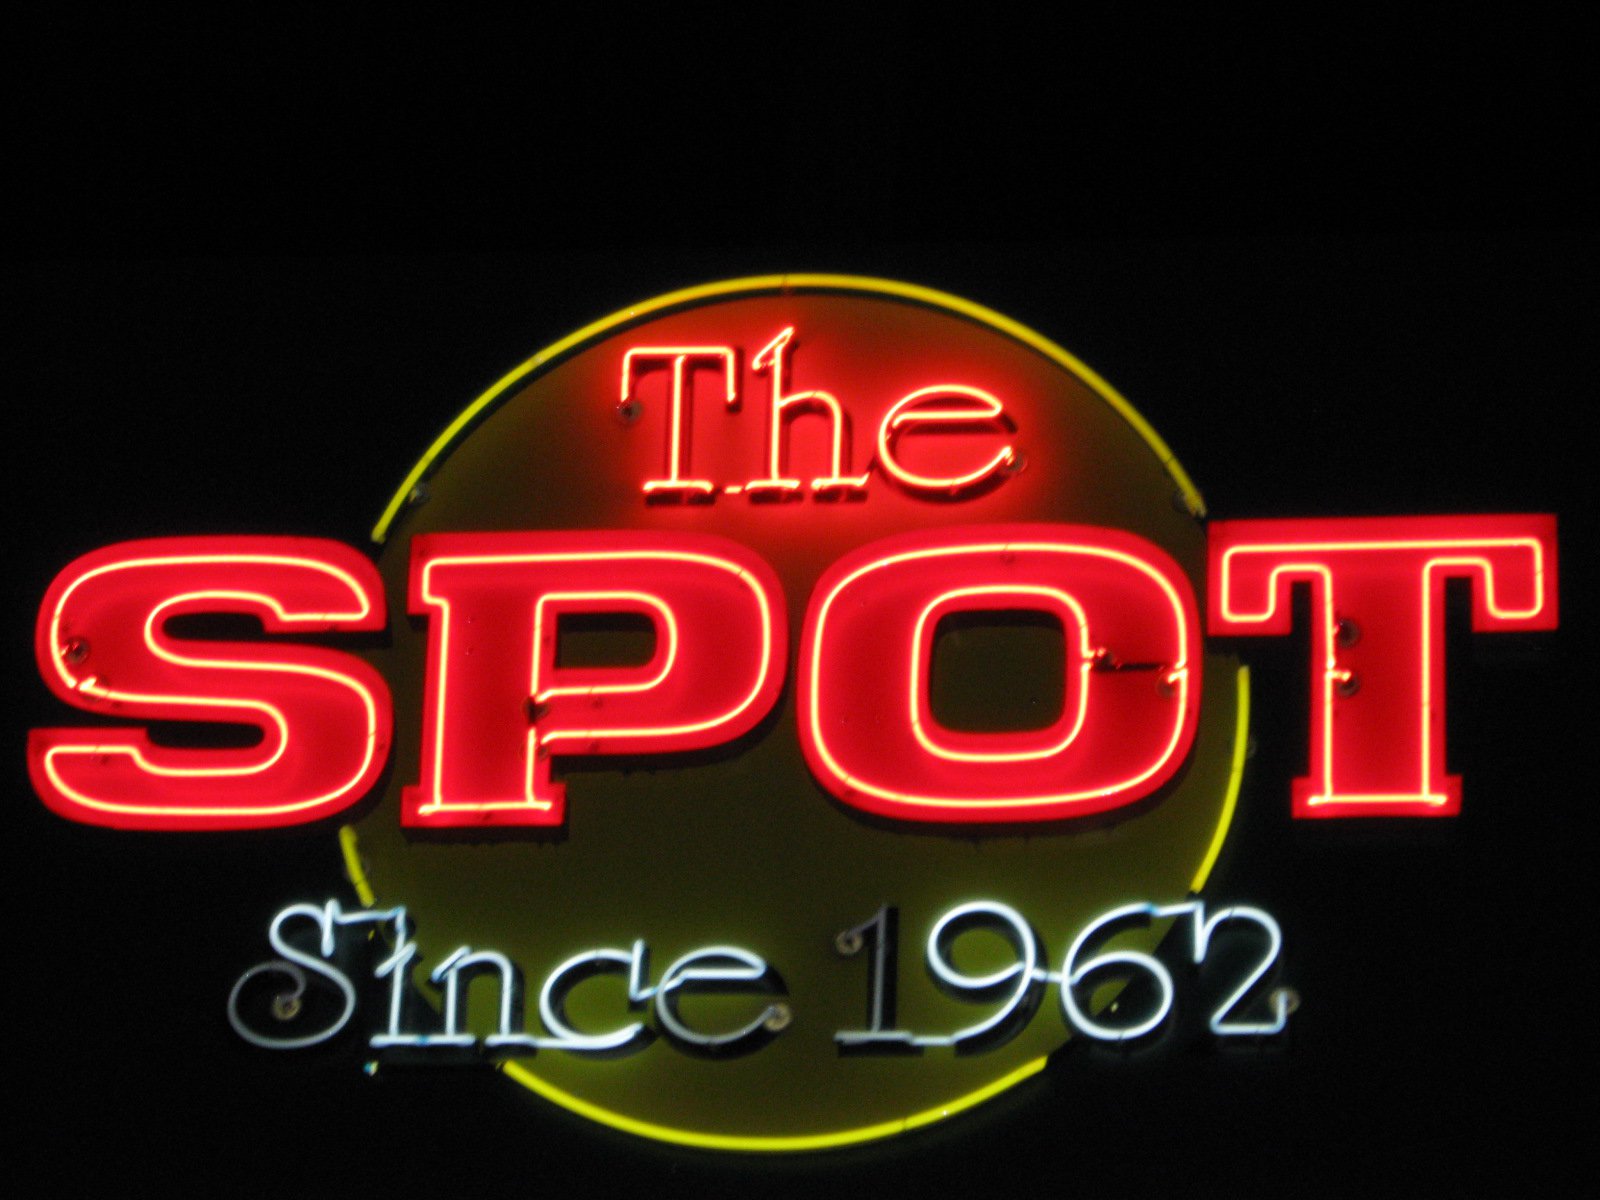 Business logo of The Spot Sports Bar & Grill